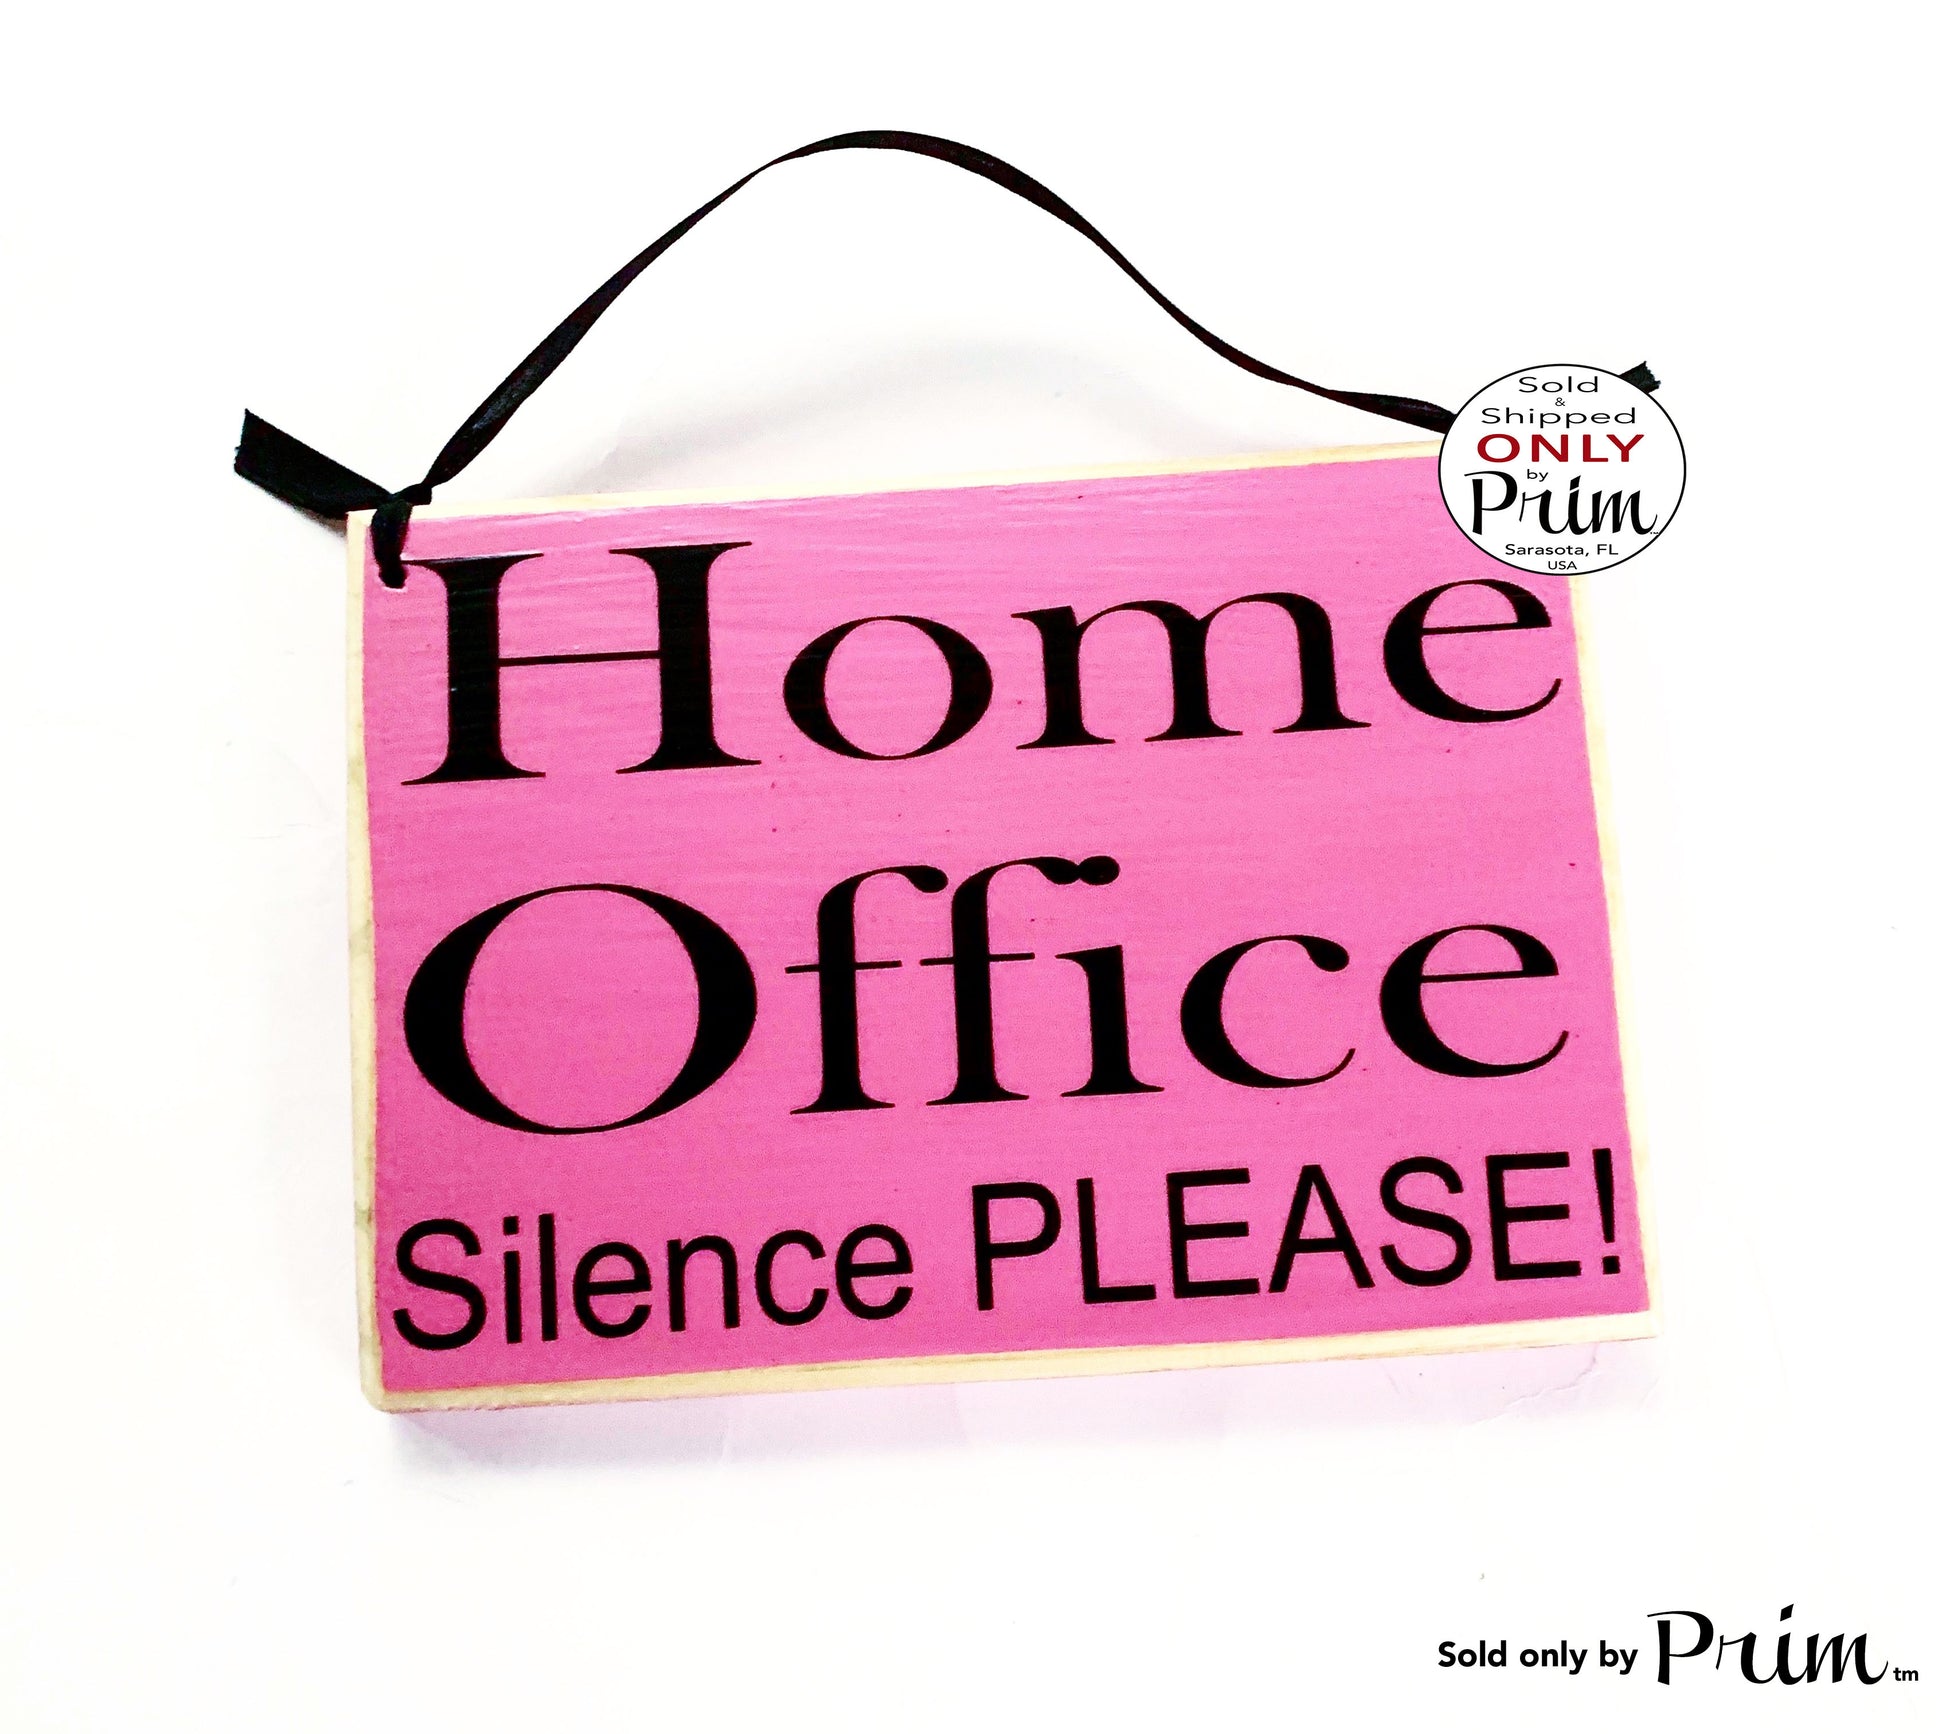 8x6 Home Office Silence Please Custom Wood Sign | Working Busy In A Meeting Session In Progress Door Plaque | Working Please Do Not Disturb